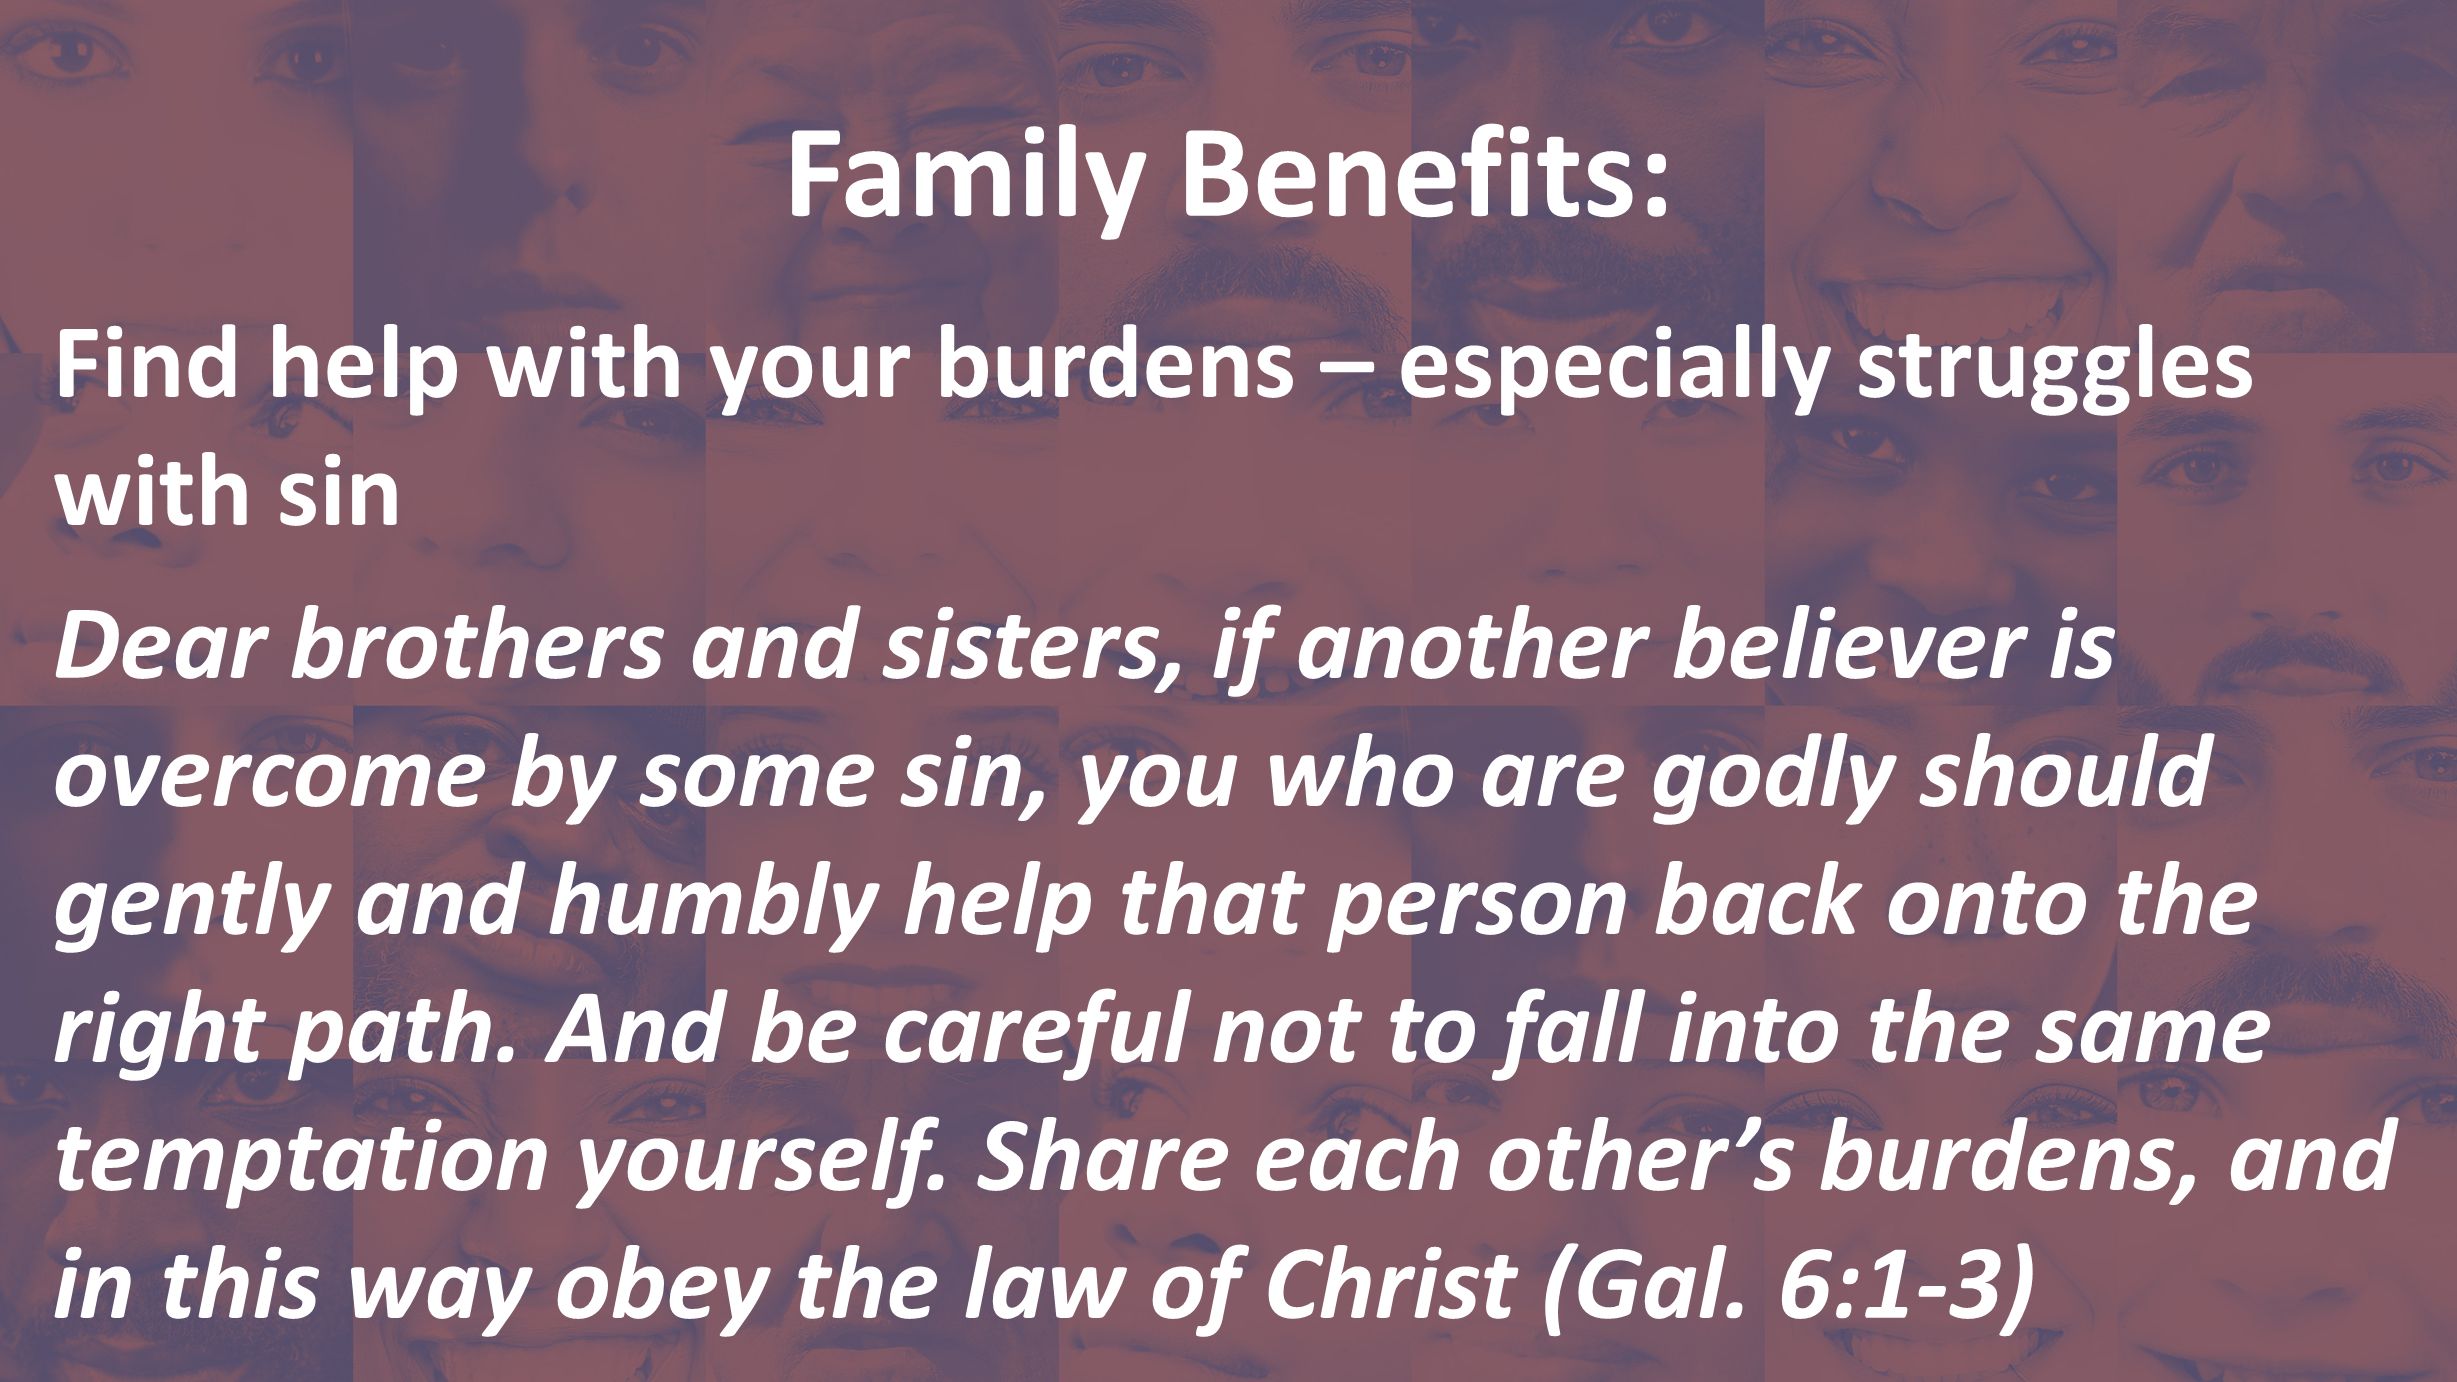 Family Benefits: Find help with your burdens – especially struggles with sin Dear brothers and sisters, if another believer is overcome by some sin, you who are godly should gently and humbly help that person back onto the right path.